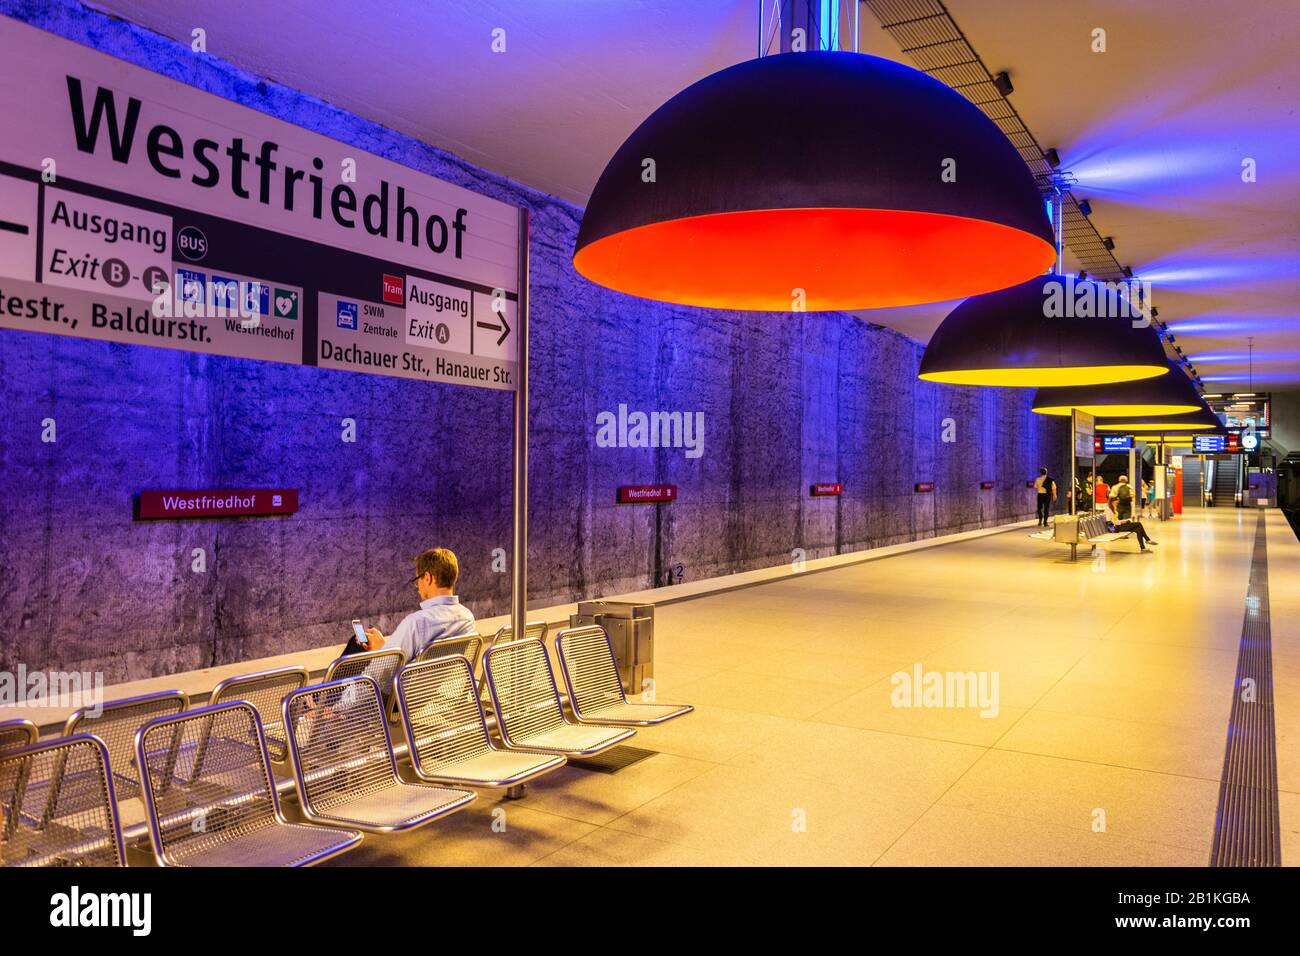 Munich, Germany – July 1, 2016. Interior view of Westfriedhof U-Bahn station on the U1 line of the Munich U-Bahn system, with people and information b Stock Photo